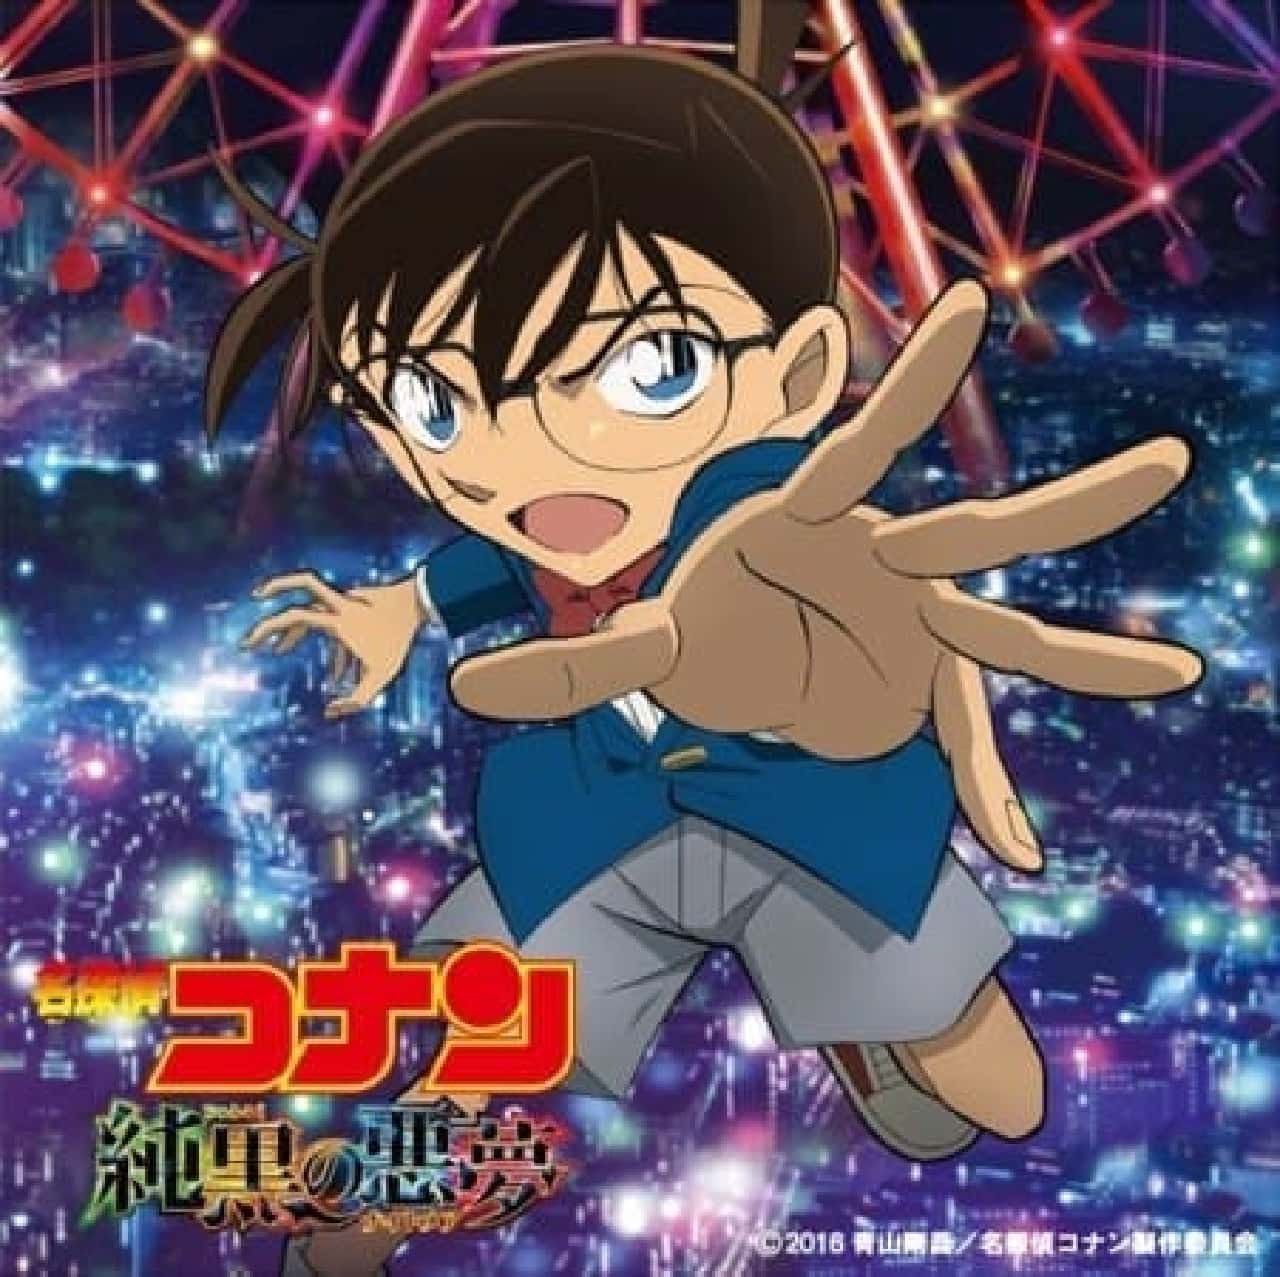 This year is also Conan's season!